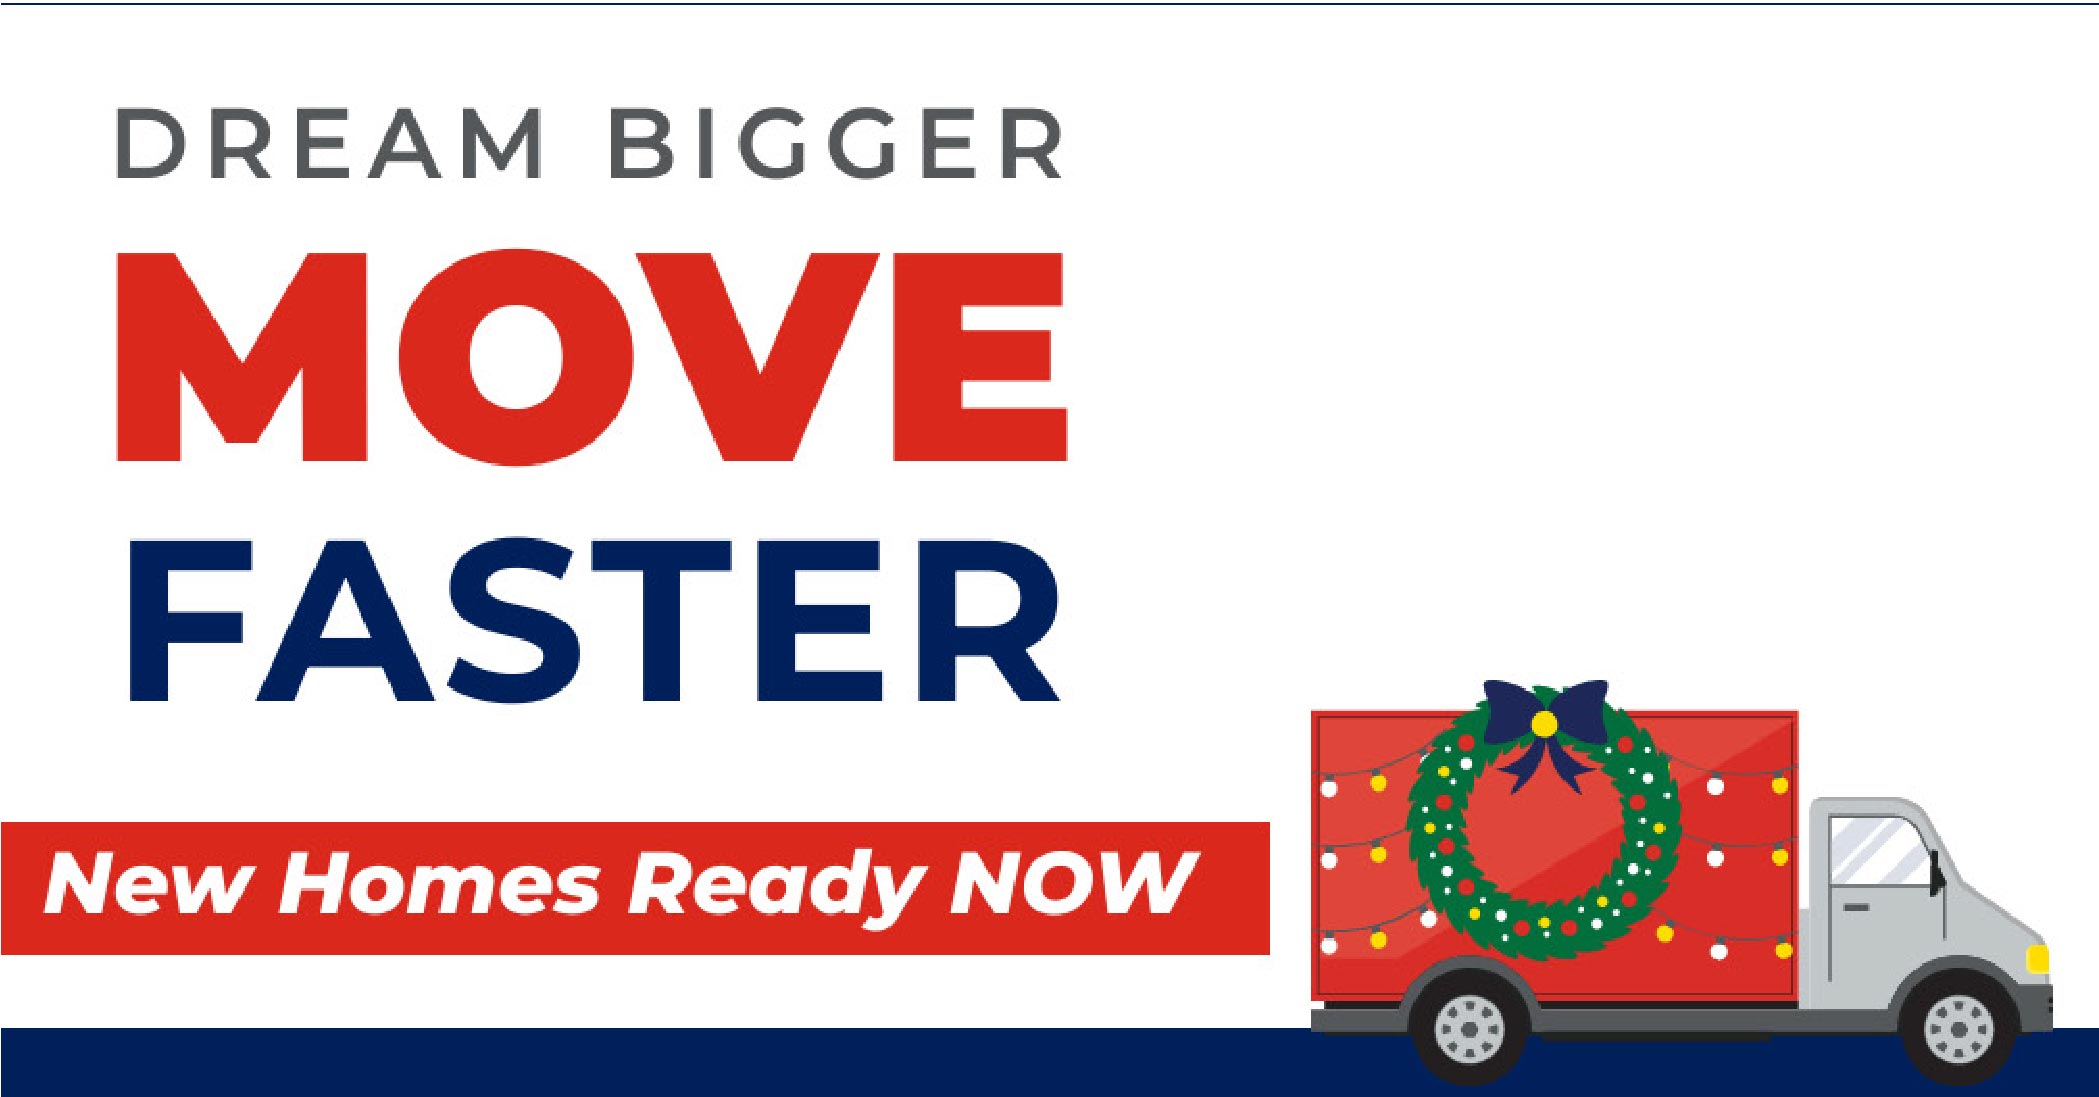 Dream Bigger Move Faster New Homes Now Ready